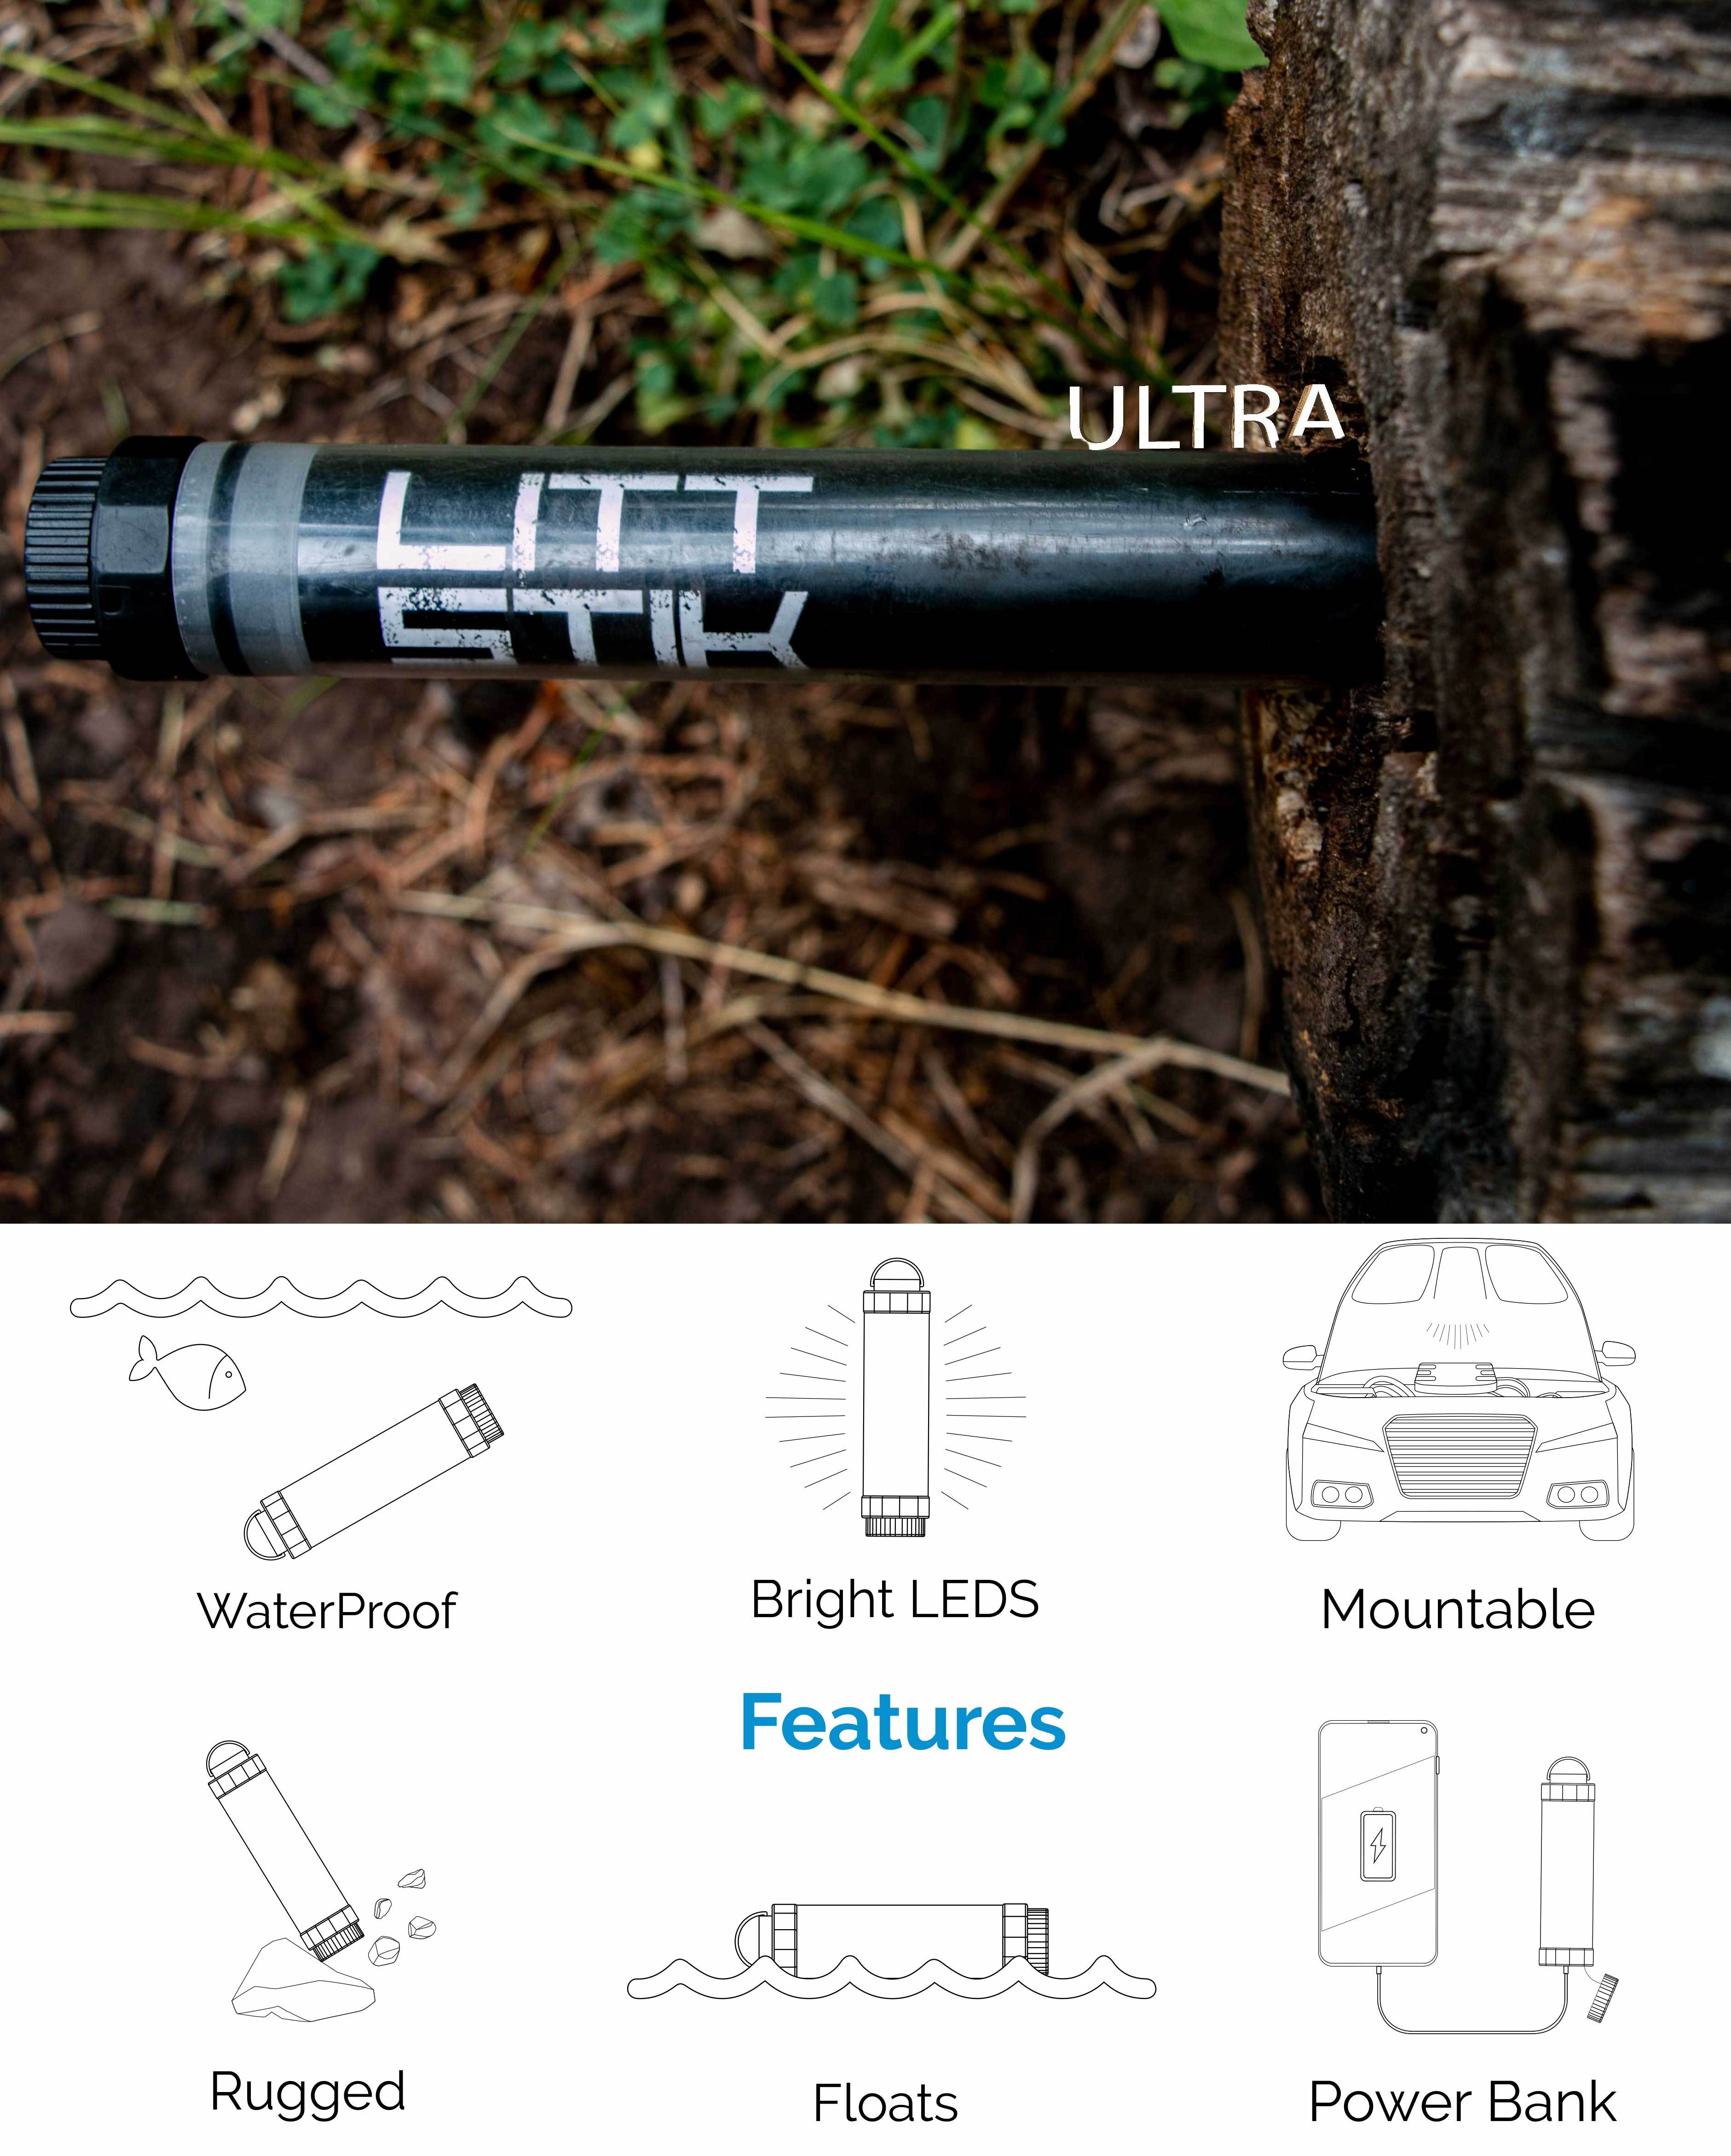 led multi use flashlight waterproof power bank rechargeable 400+ lumen output mountable with glow in the dark button flashlight by litt industries